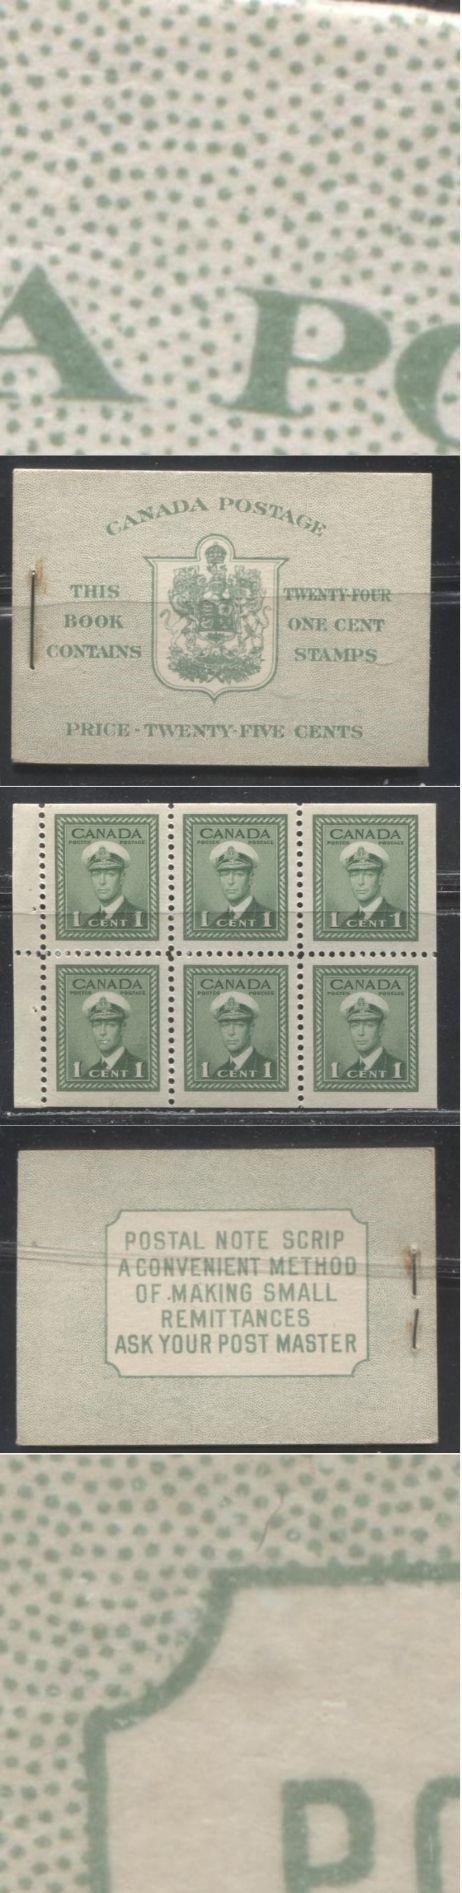 Lot 246 Canada #BK32f 1942-1949 War Issue, Complete 25¢ English Booklet, 4 Panes of 1c Green, Ribbed Vertical Wove Paper, Harris Front Cover Type IIa, Back Cover Type Cbiv, 7c & 6c Airmail Rates Page